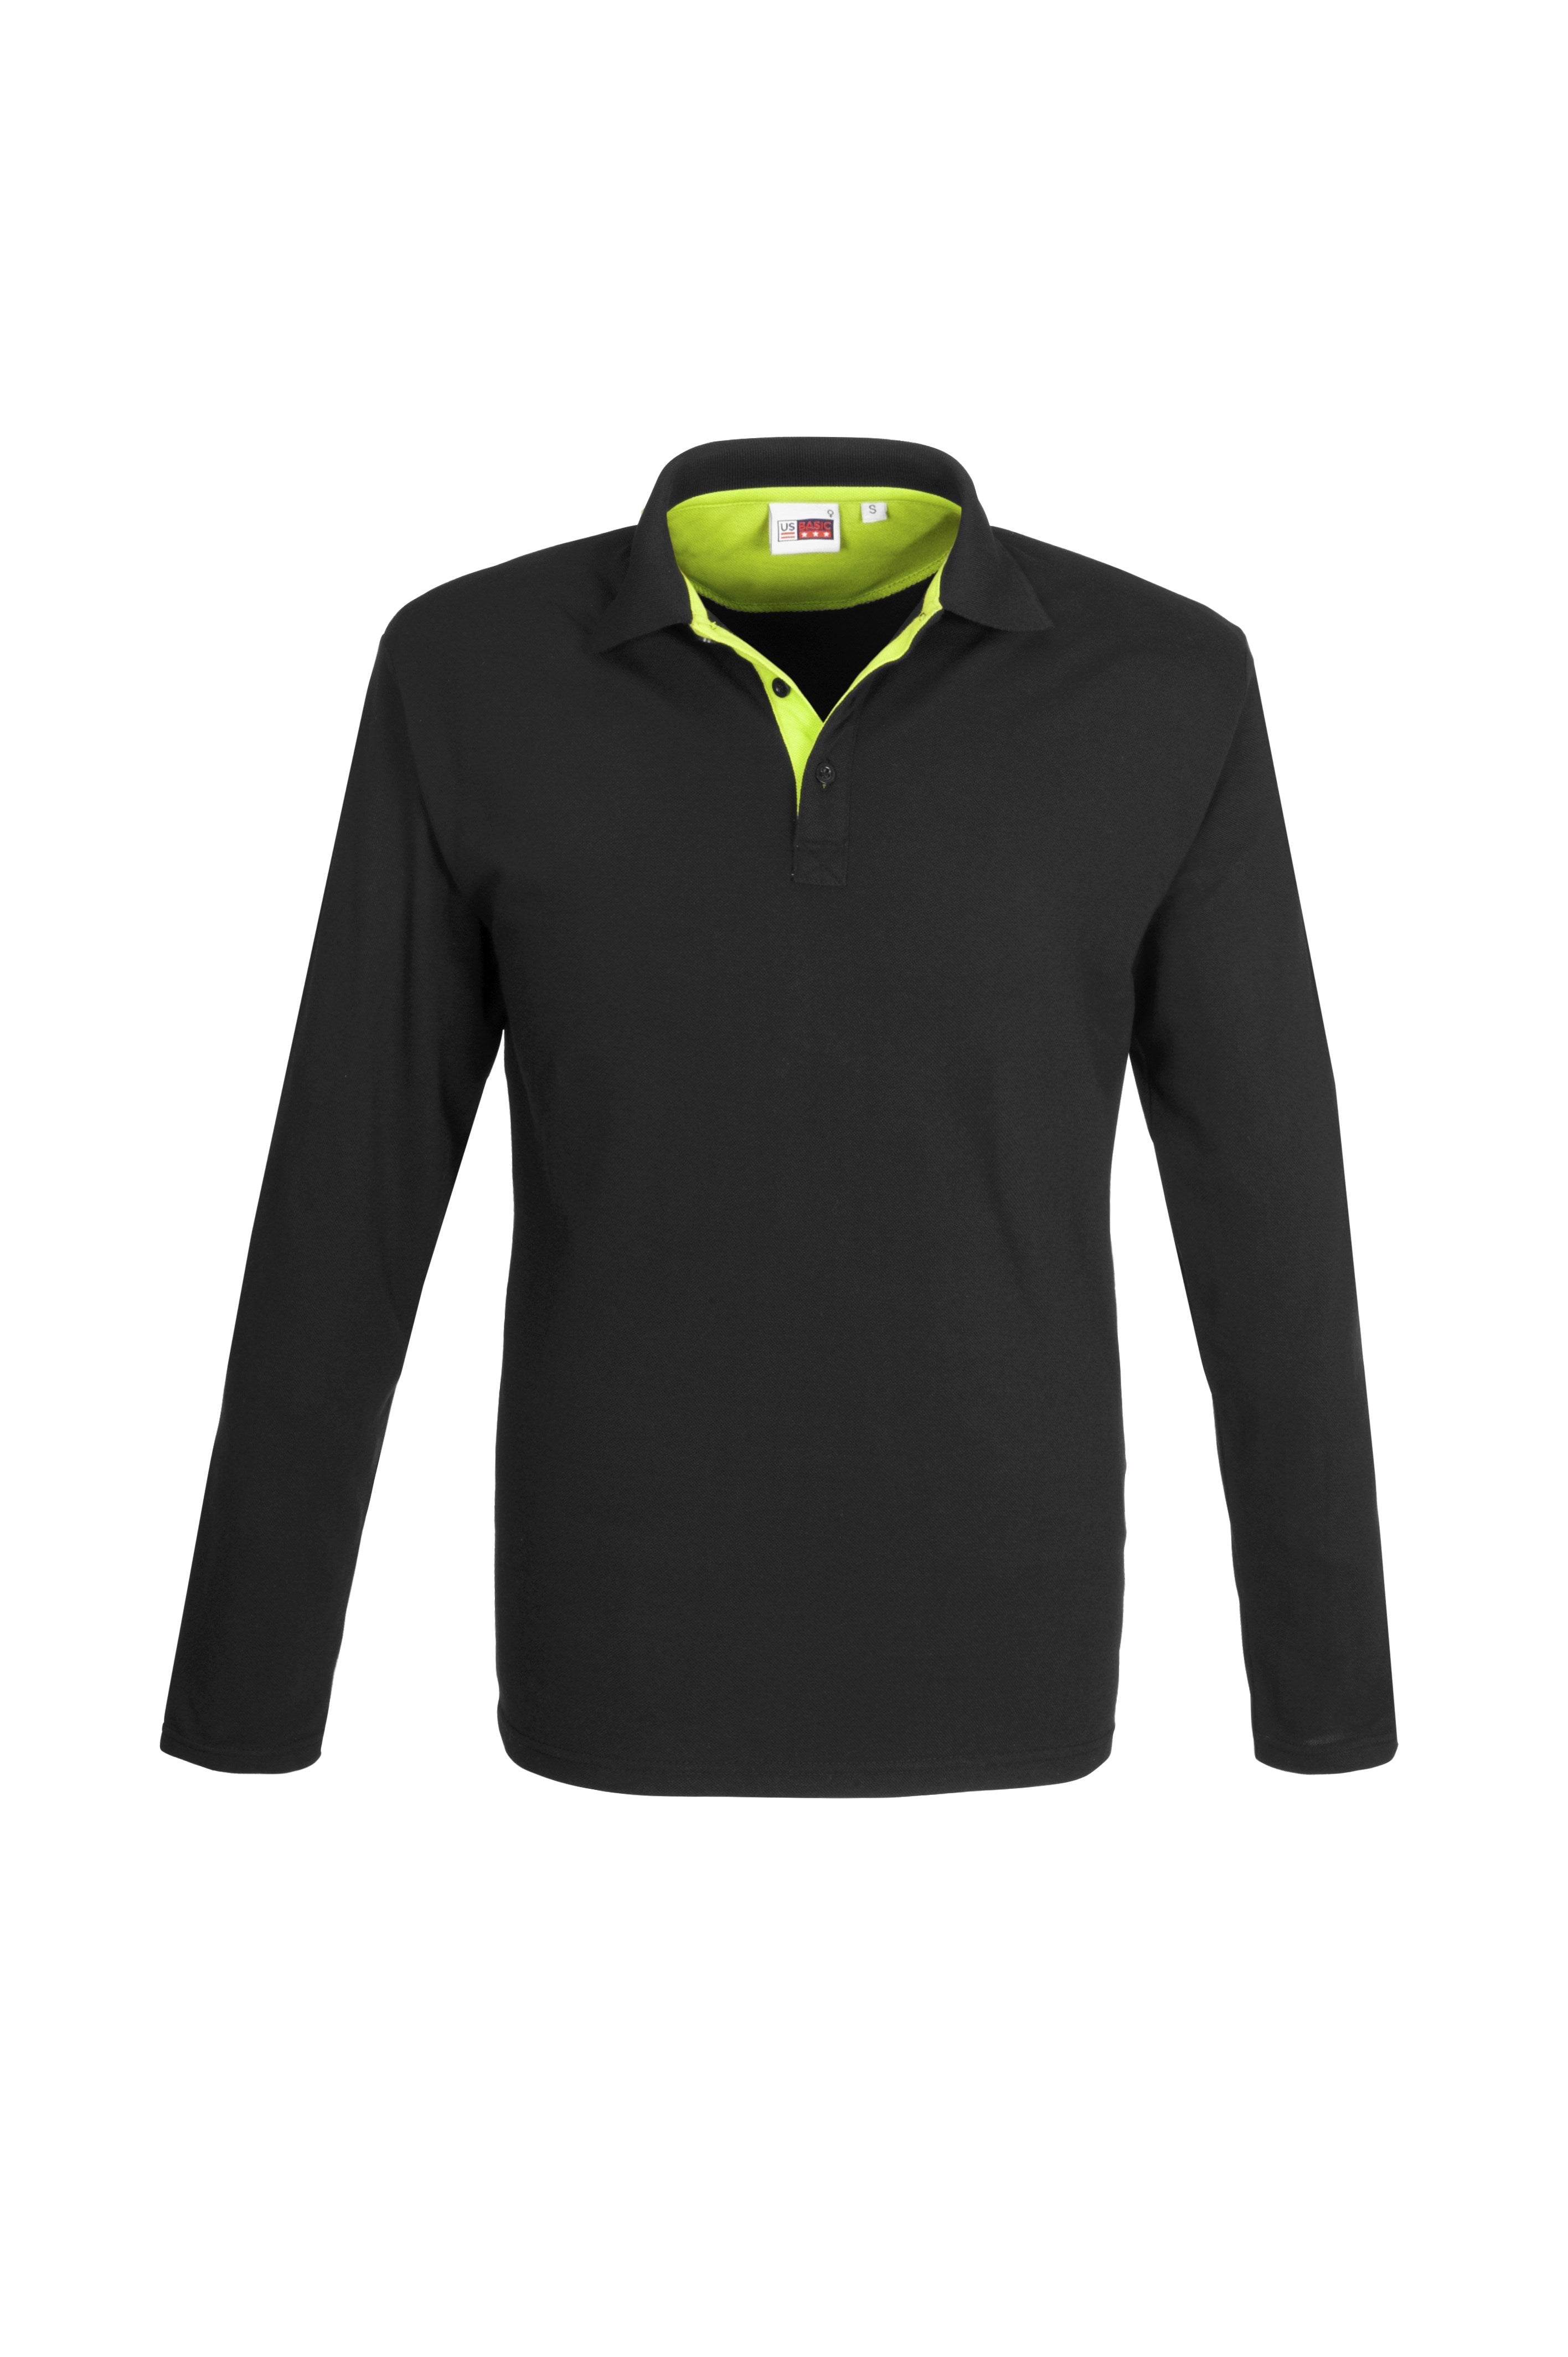 Mens Long Sleeve Solo Golf Shirt - Yellow Only-L-Lime-L